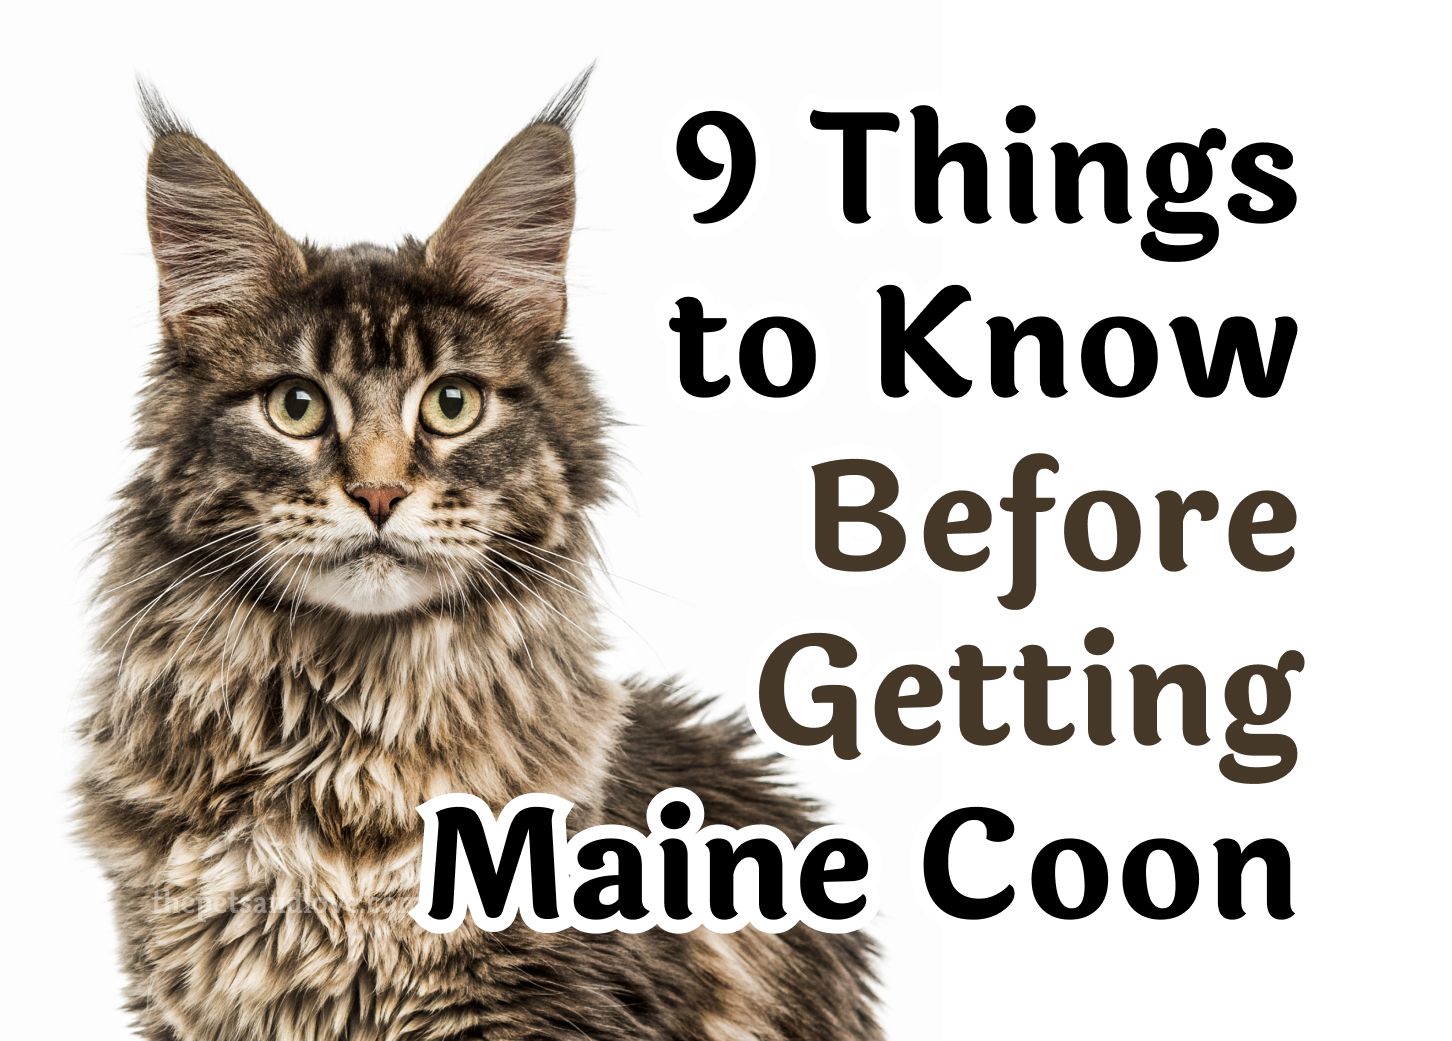 9 things to know before getting a Maine Coon